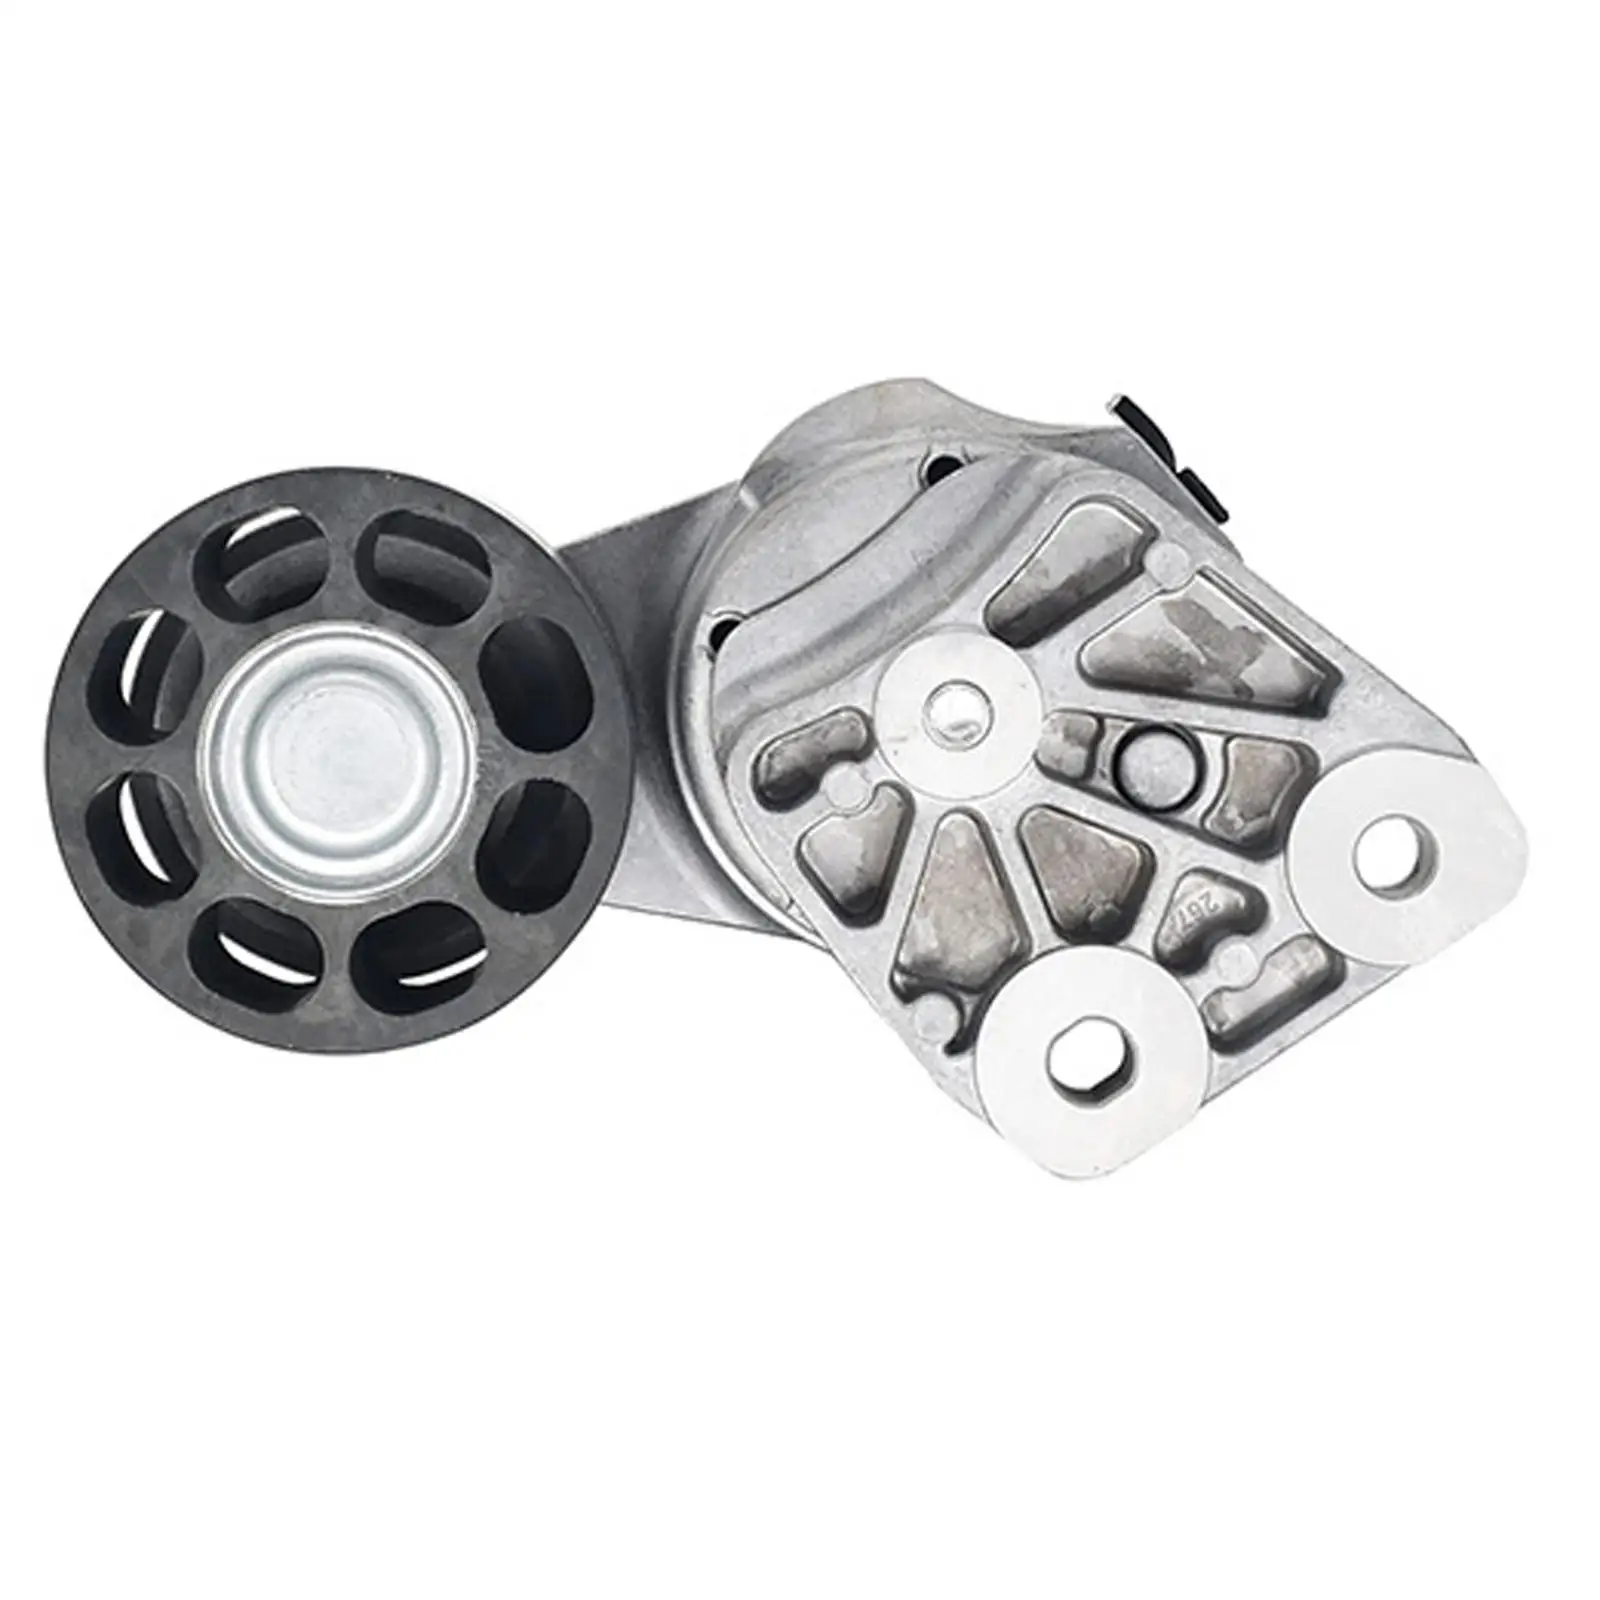 Air Conditioner Belt Tensioner Portable Engine Adjustable Multifunction Upgrade 23669027 Durability for Vehicle Accessories